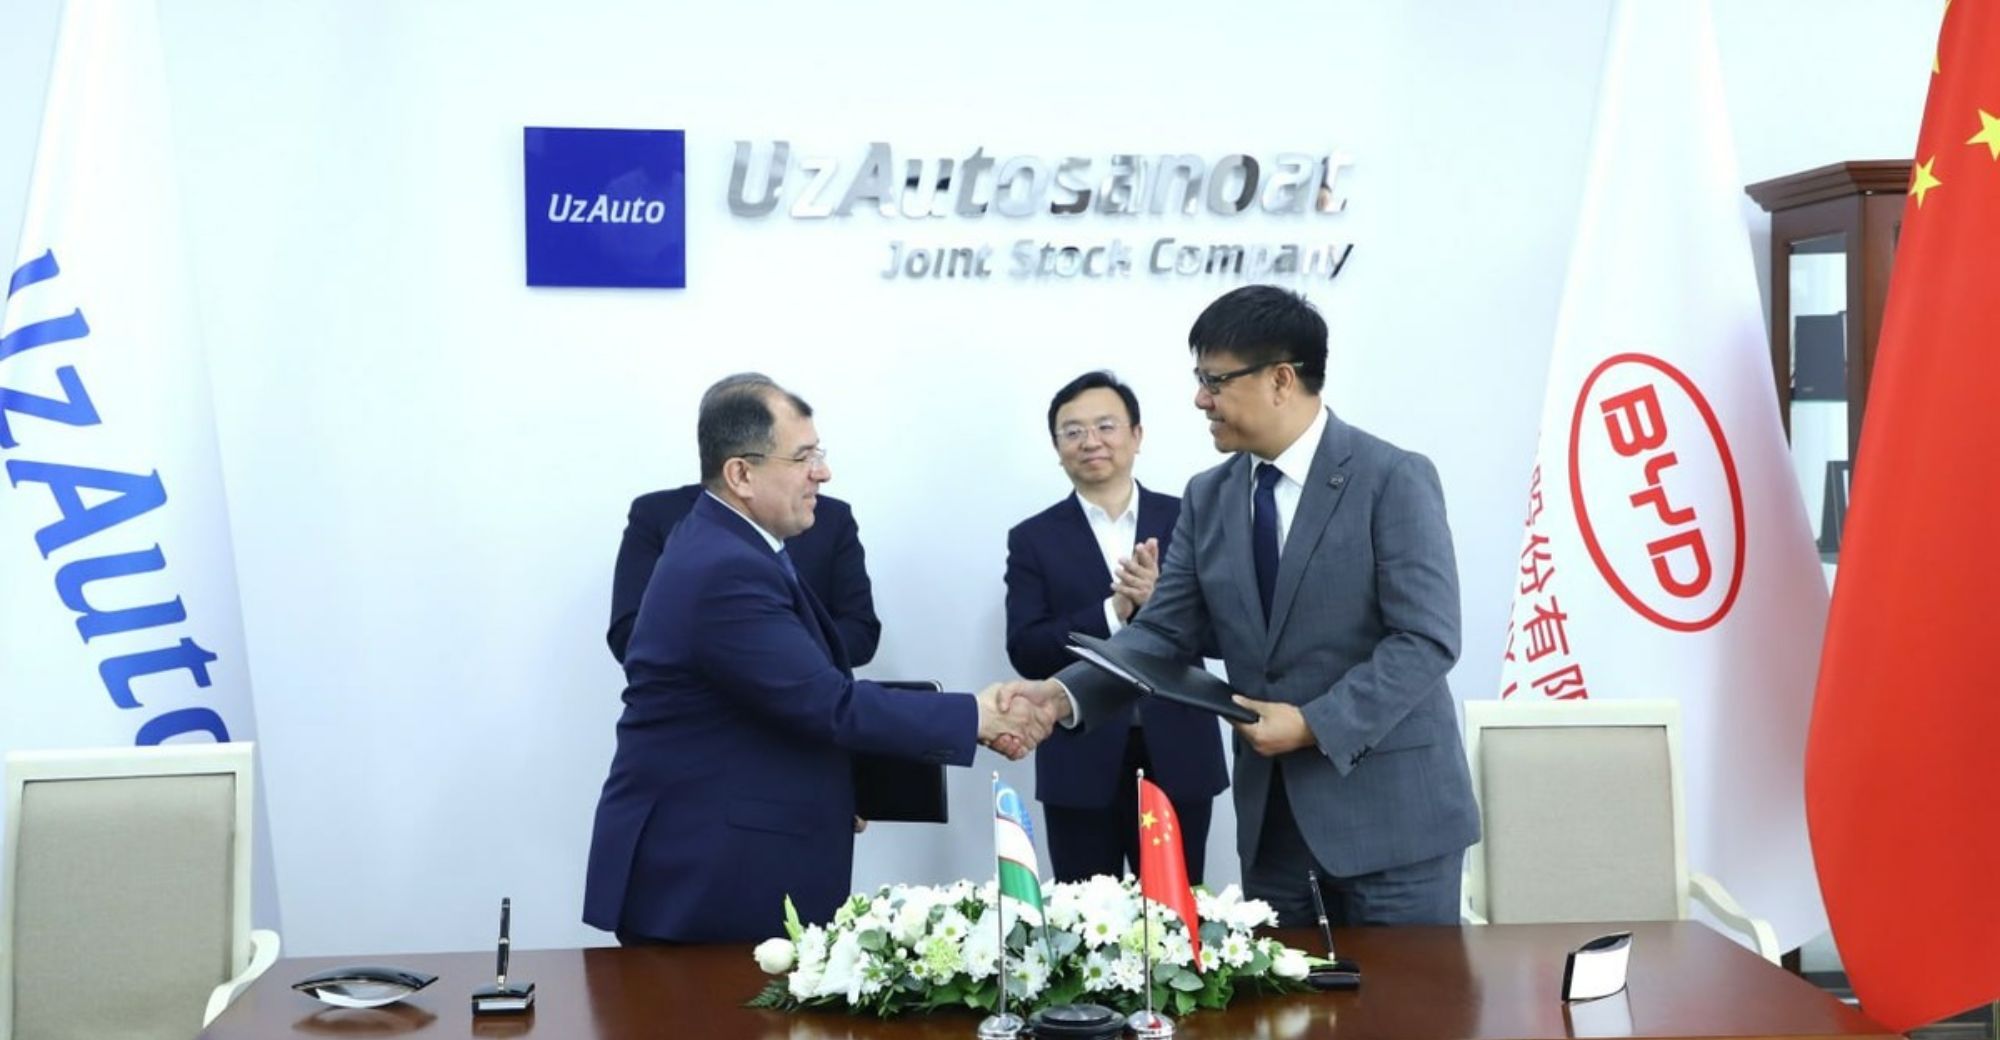 BYD and Uzbekistan Sign An Agreement for A Joint Venture to Produce Electric and Hybrid Vehicles